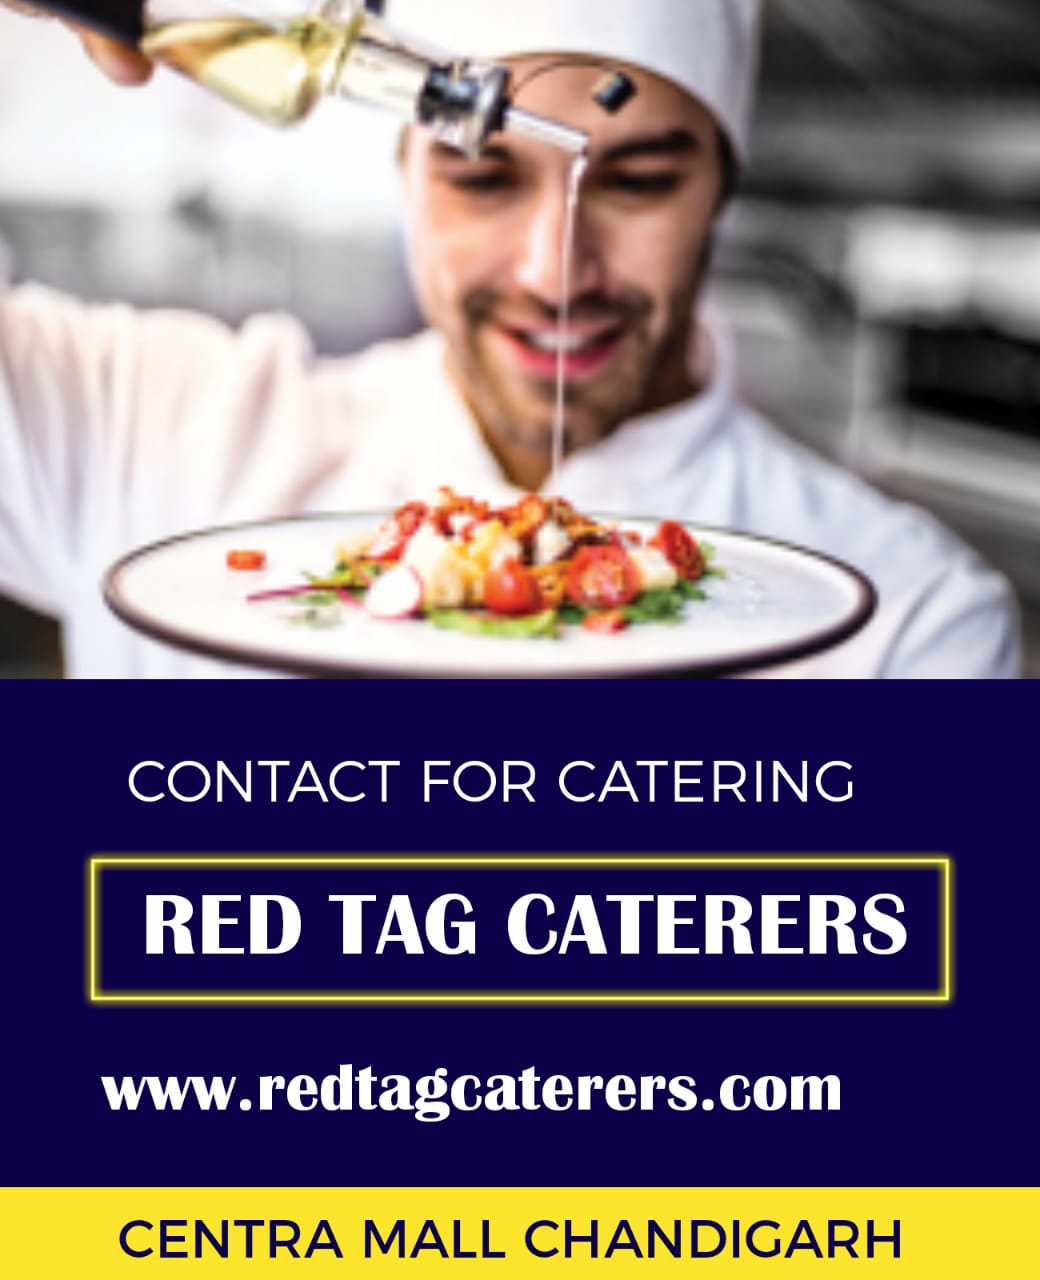 Best experience and set goals by RED TAG catering services in Chandigarh | Red Tag Caterers | Best experience caterer in Chandigarh, best quality caterer in Chandigarh, best services caterer in Chandigarh, top class caterer in Chandigarh, high quality caterer in Chandigarh - GL46305